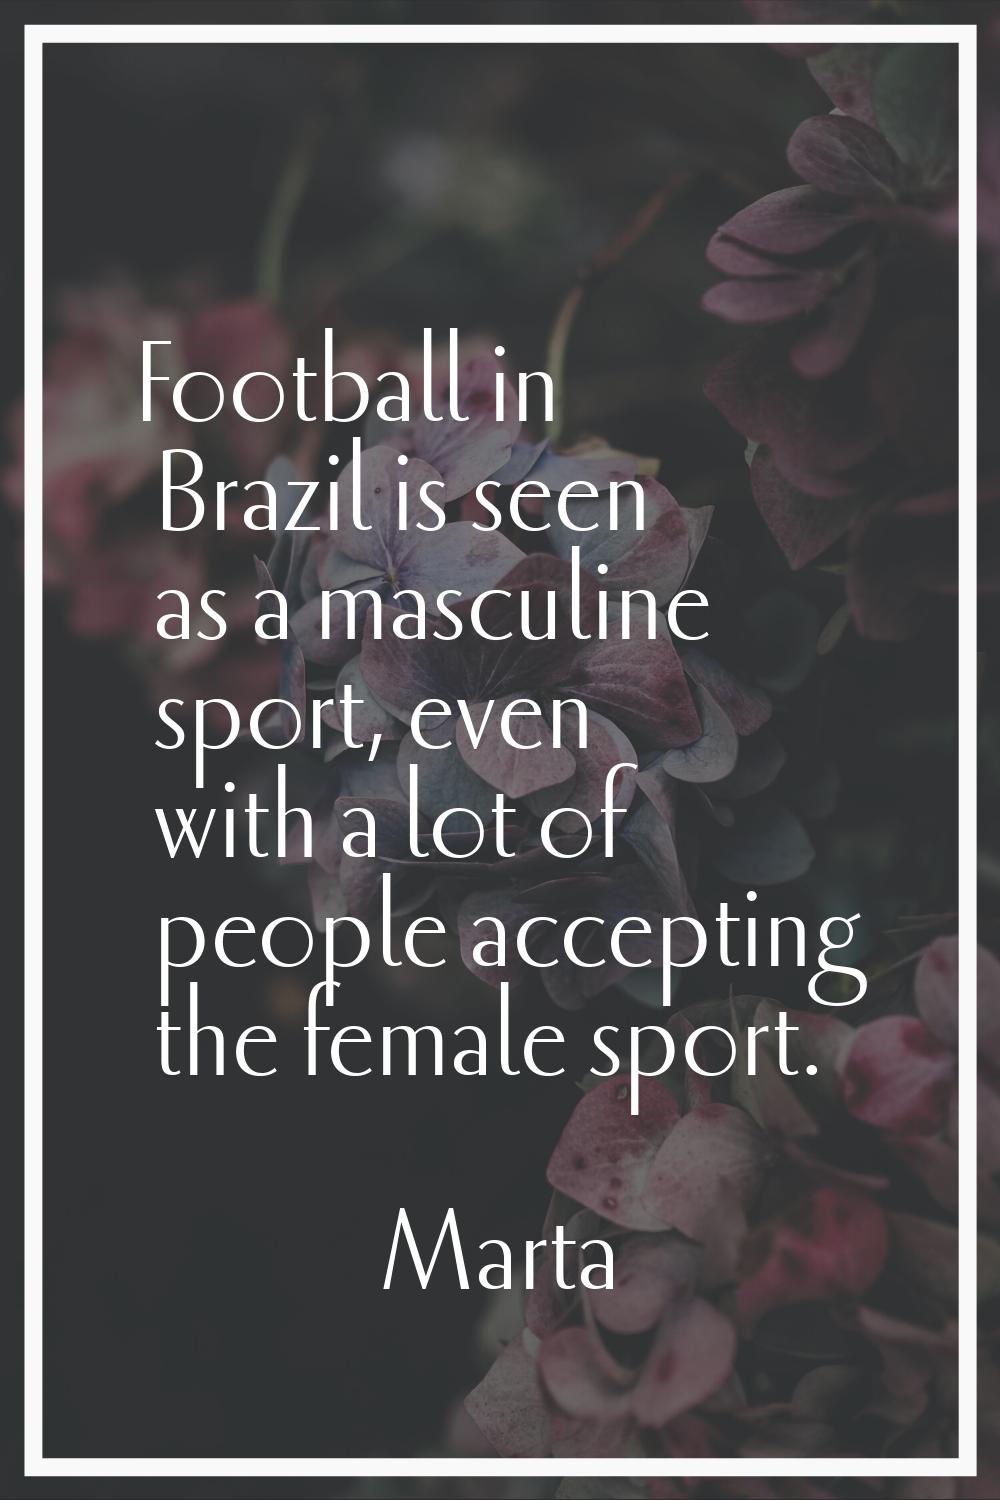 Football in Brazil is seen as a masculine sport, even with a lot of people accepting the female spo